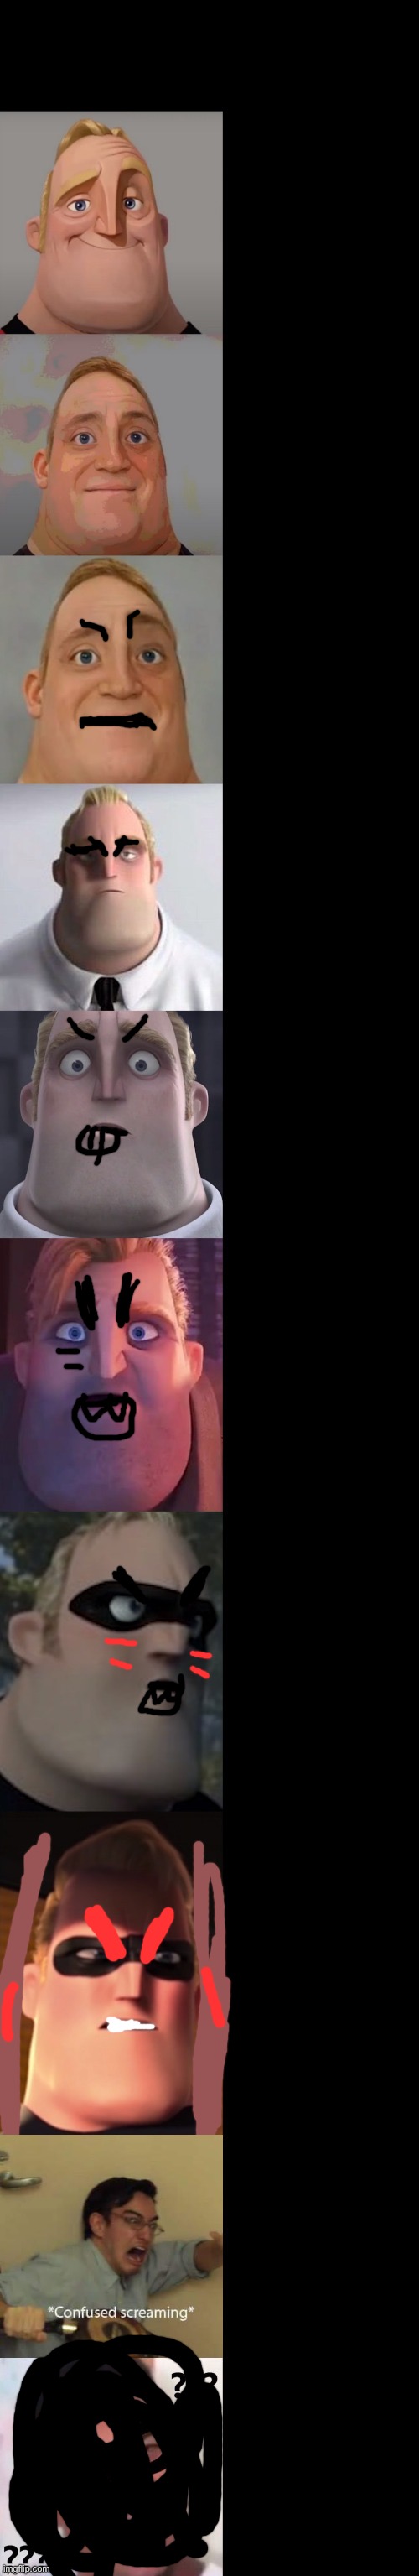 Mr incredible becoming confused and angry at the same time | image tagged in mr incredible becoming confused | made w/ Imgflip meme maker